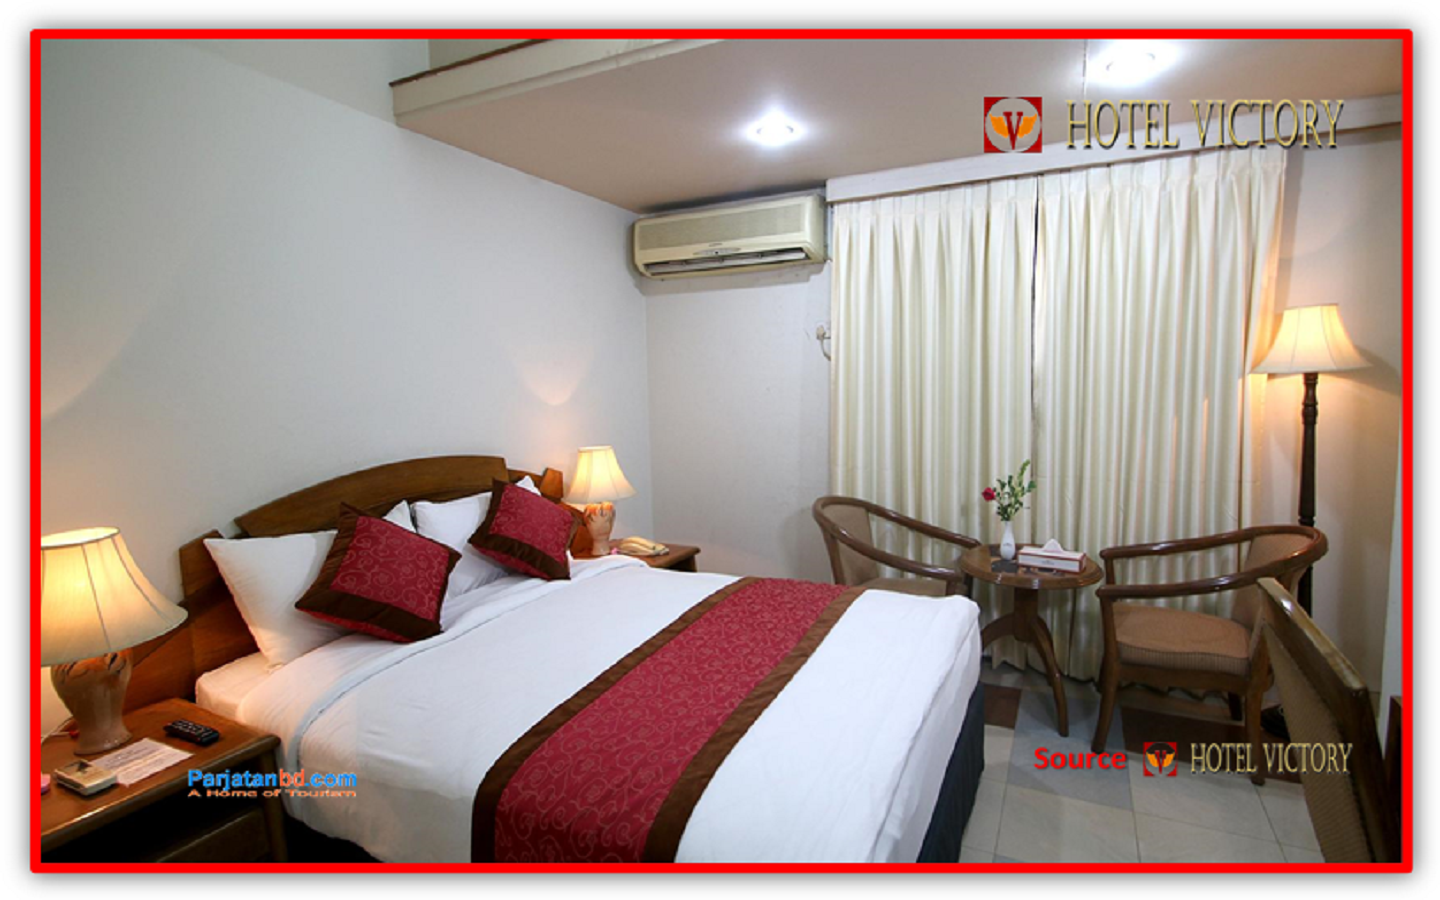 Room Deluxe Couple -1, Hotel Victory Limited, Naya Paltan